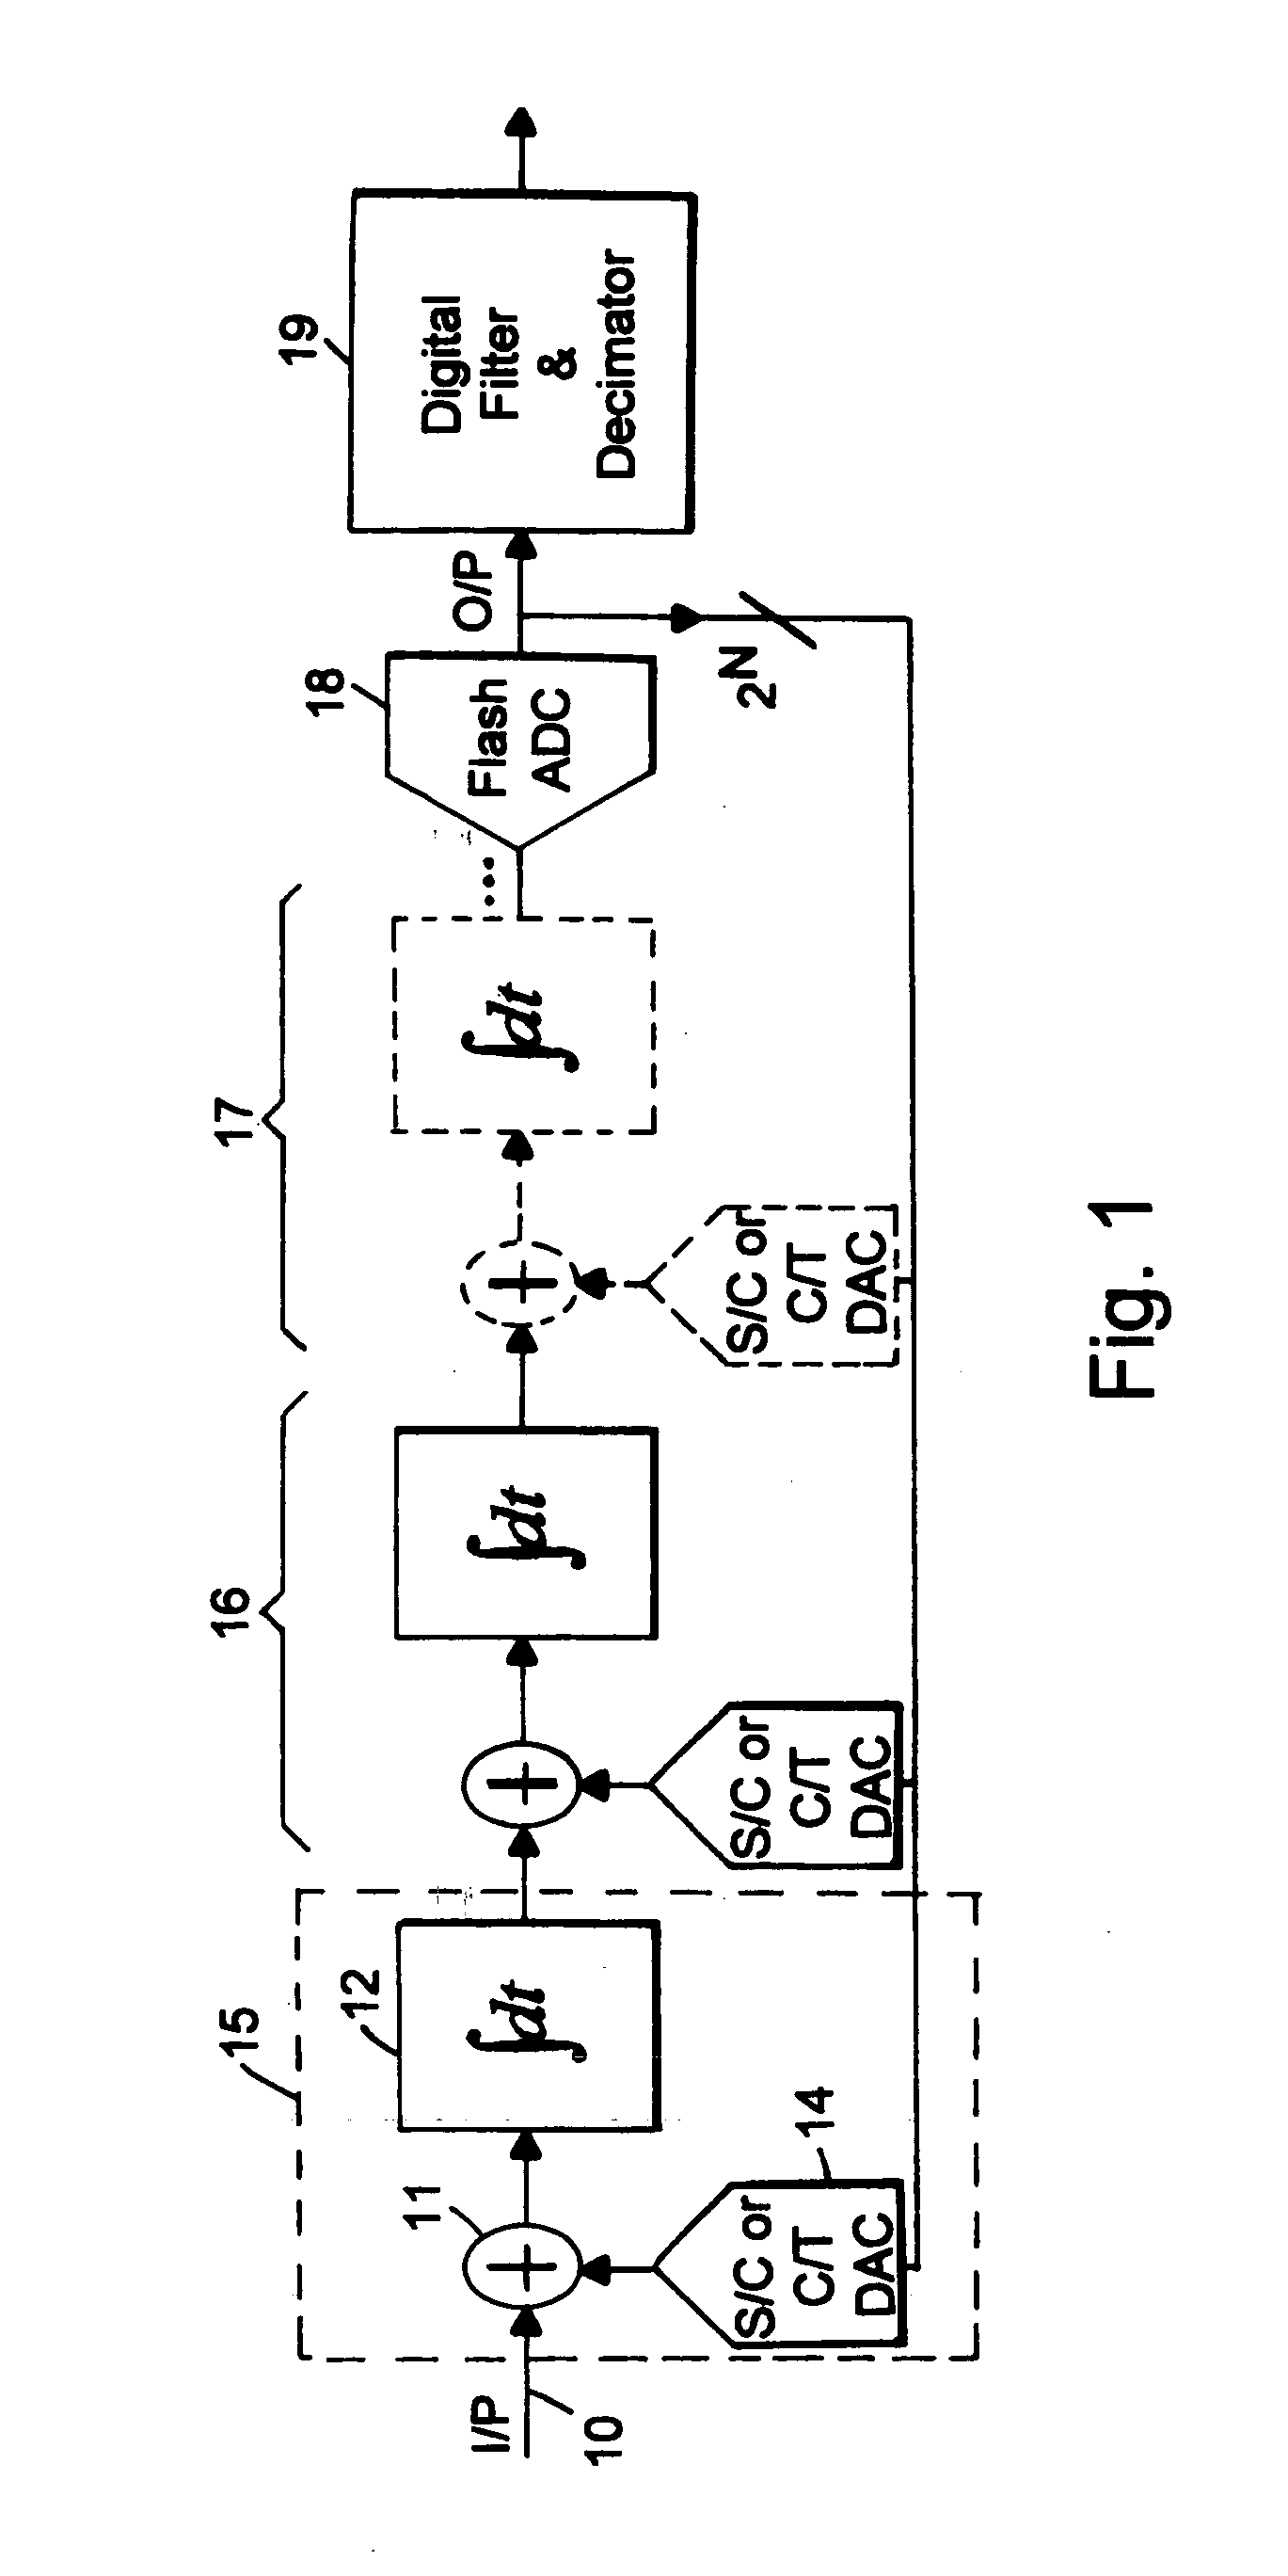 Differential front-end continuous-time sigma-delta ADC using chopper stabilisation